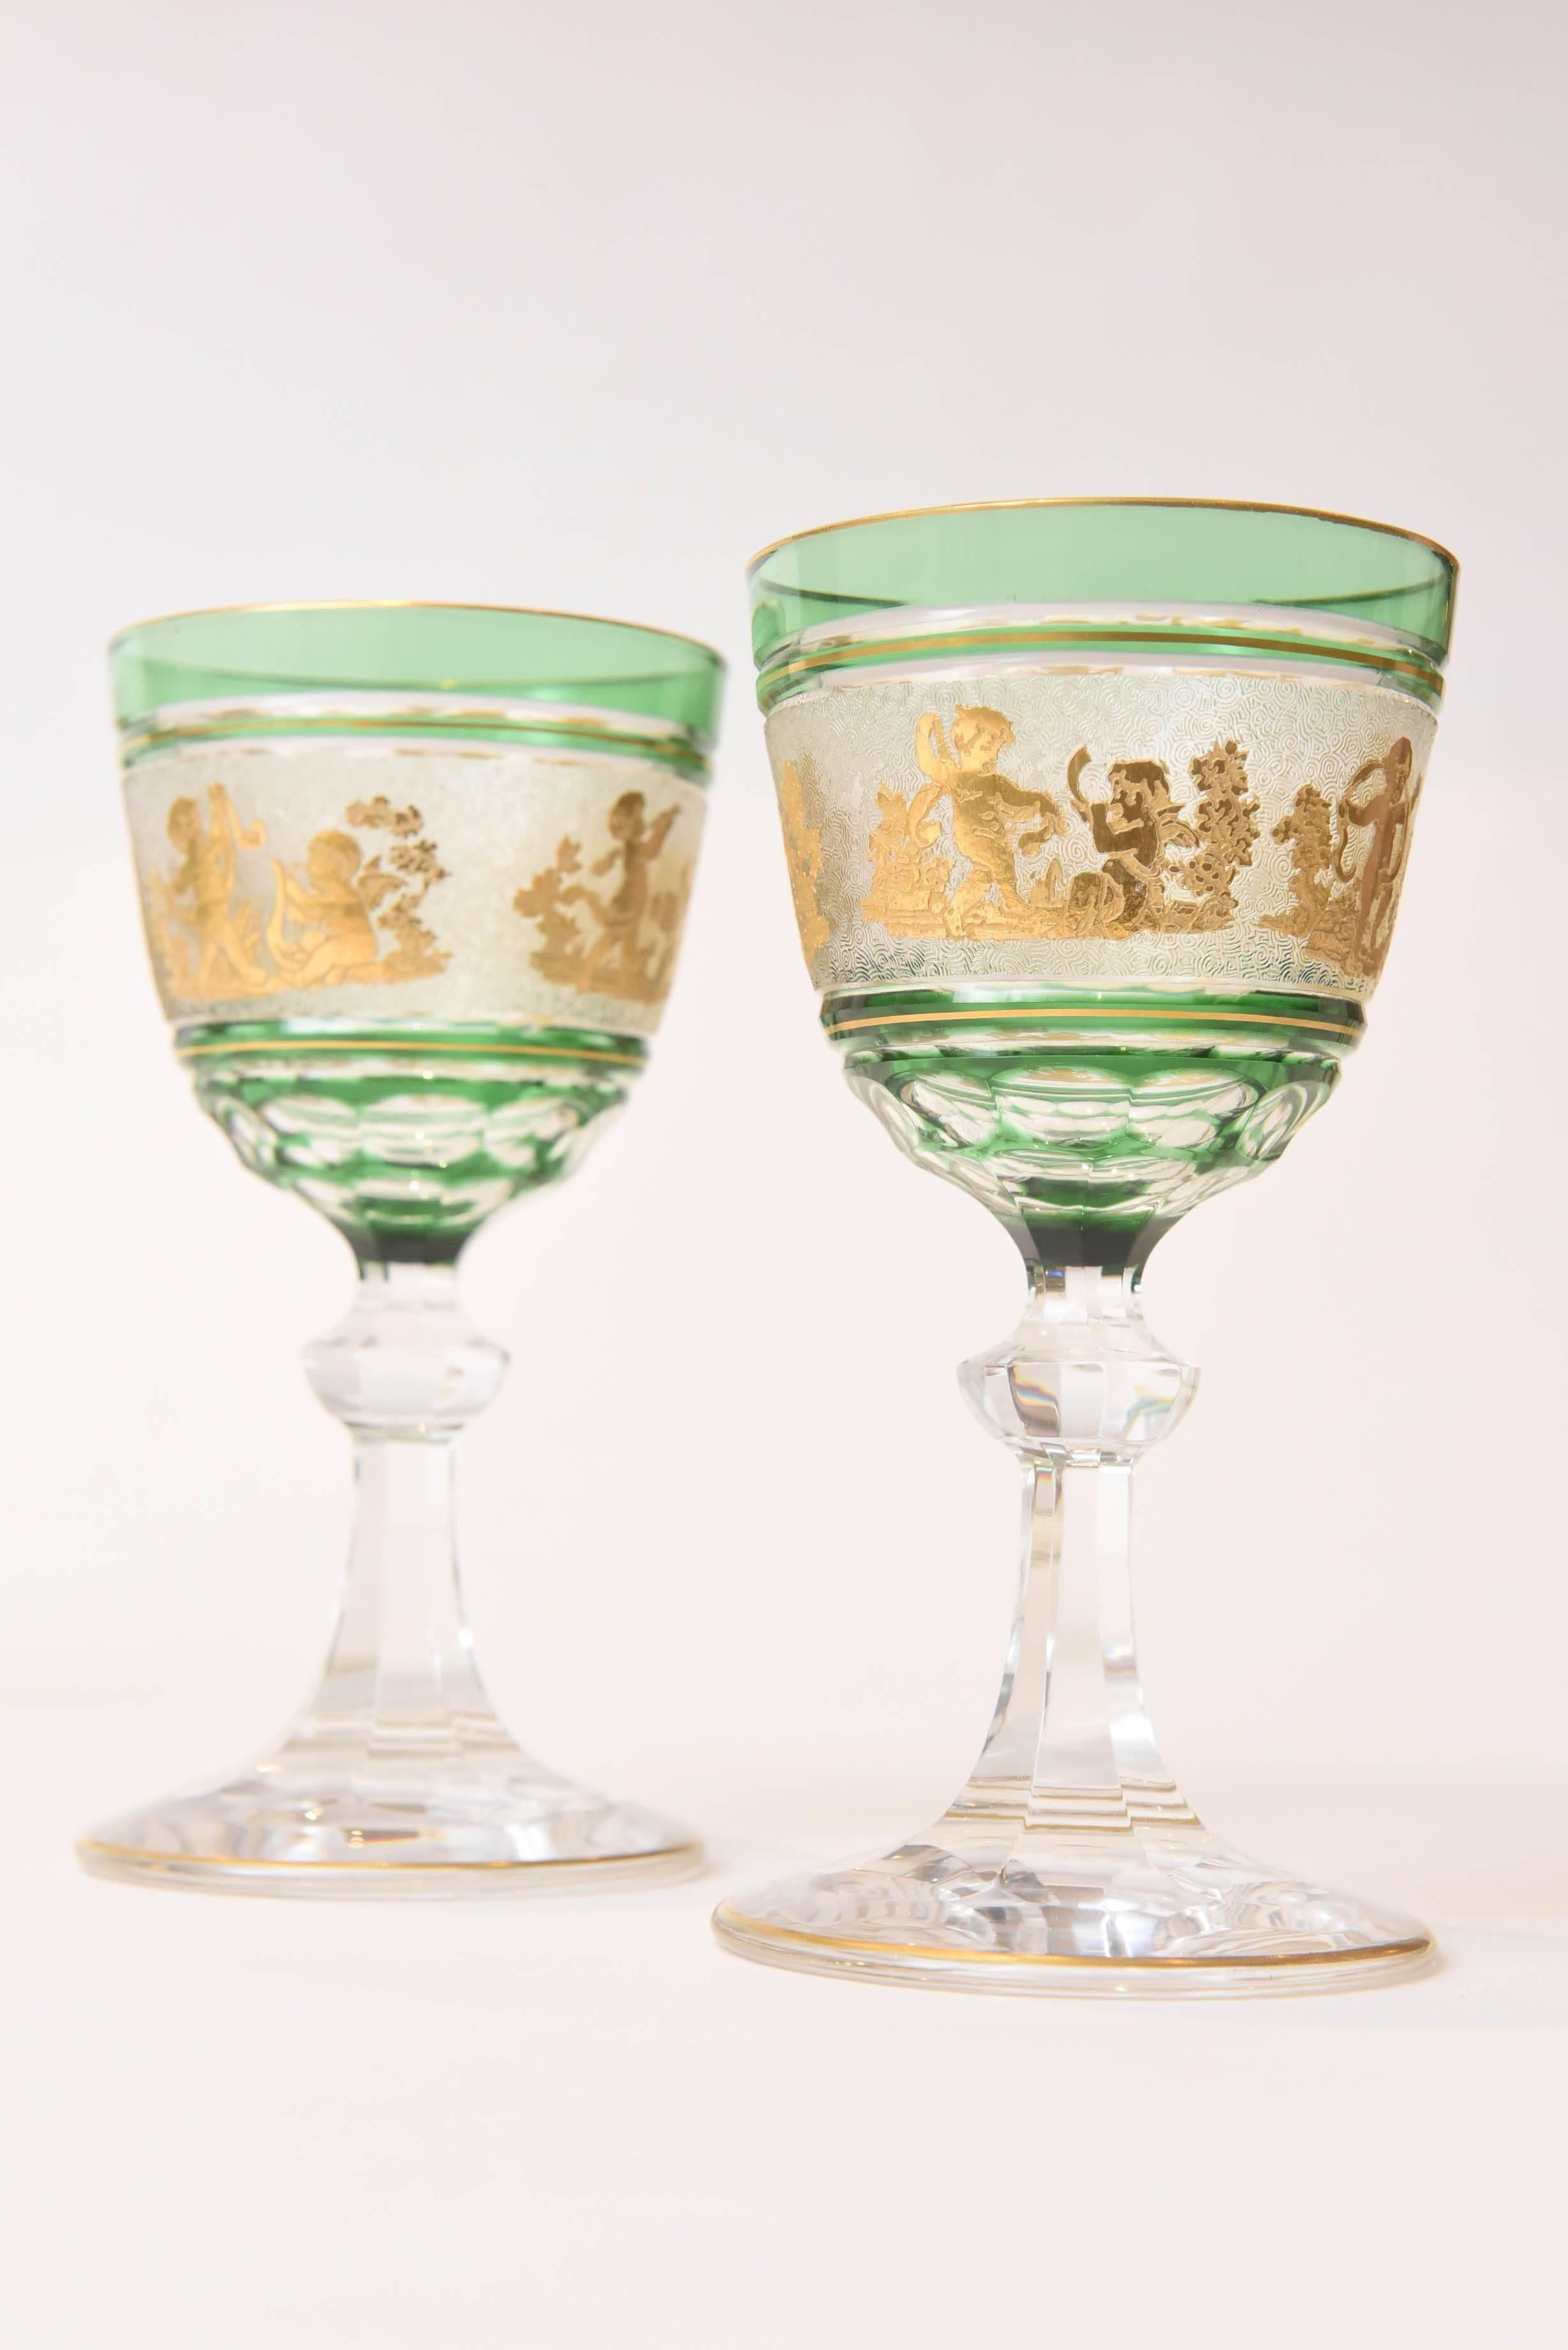 Set of Six Val St Lambert Green and Gold Cameo Figures Fine Crystal Wine Glasses 2